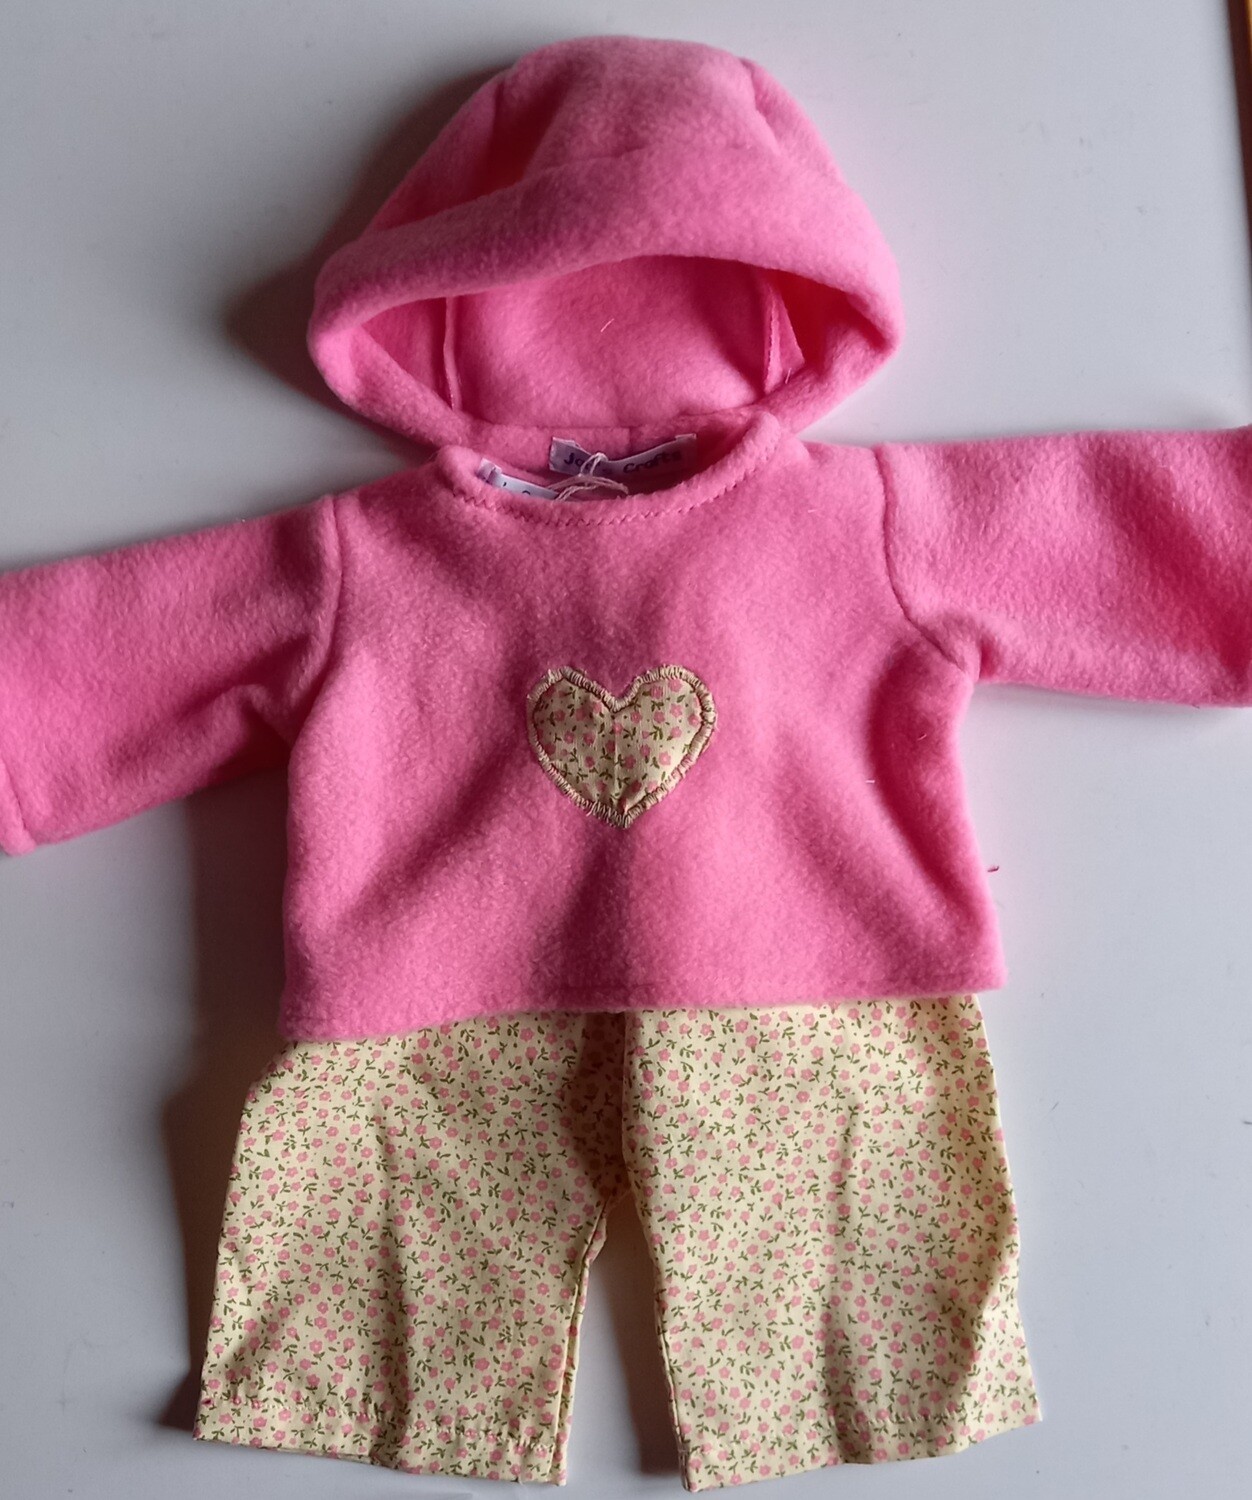 Outfit: Pink fleece top PJs with hat & floral trousers for 43cm doll